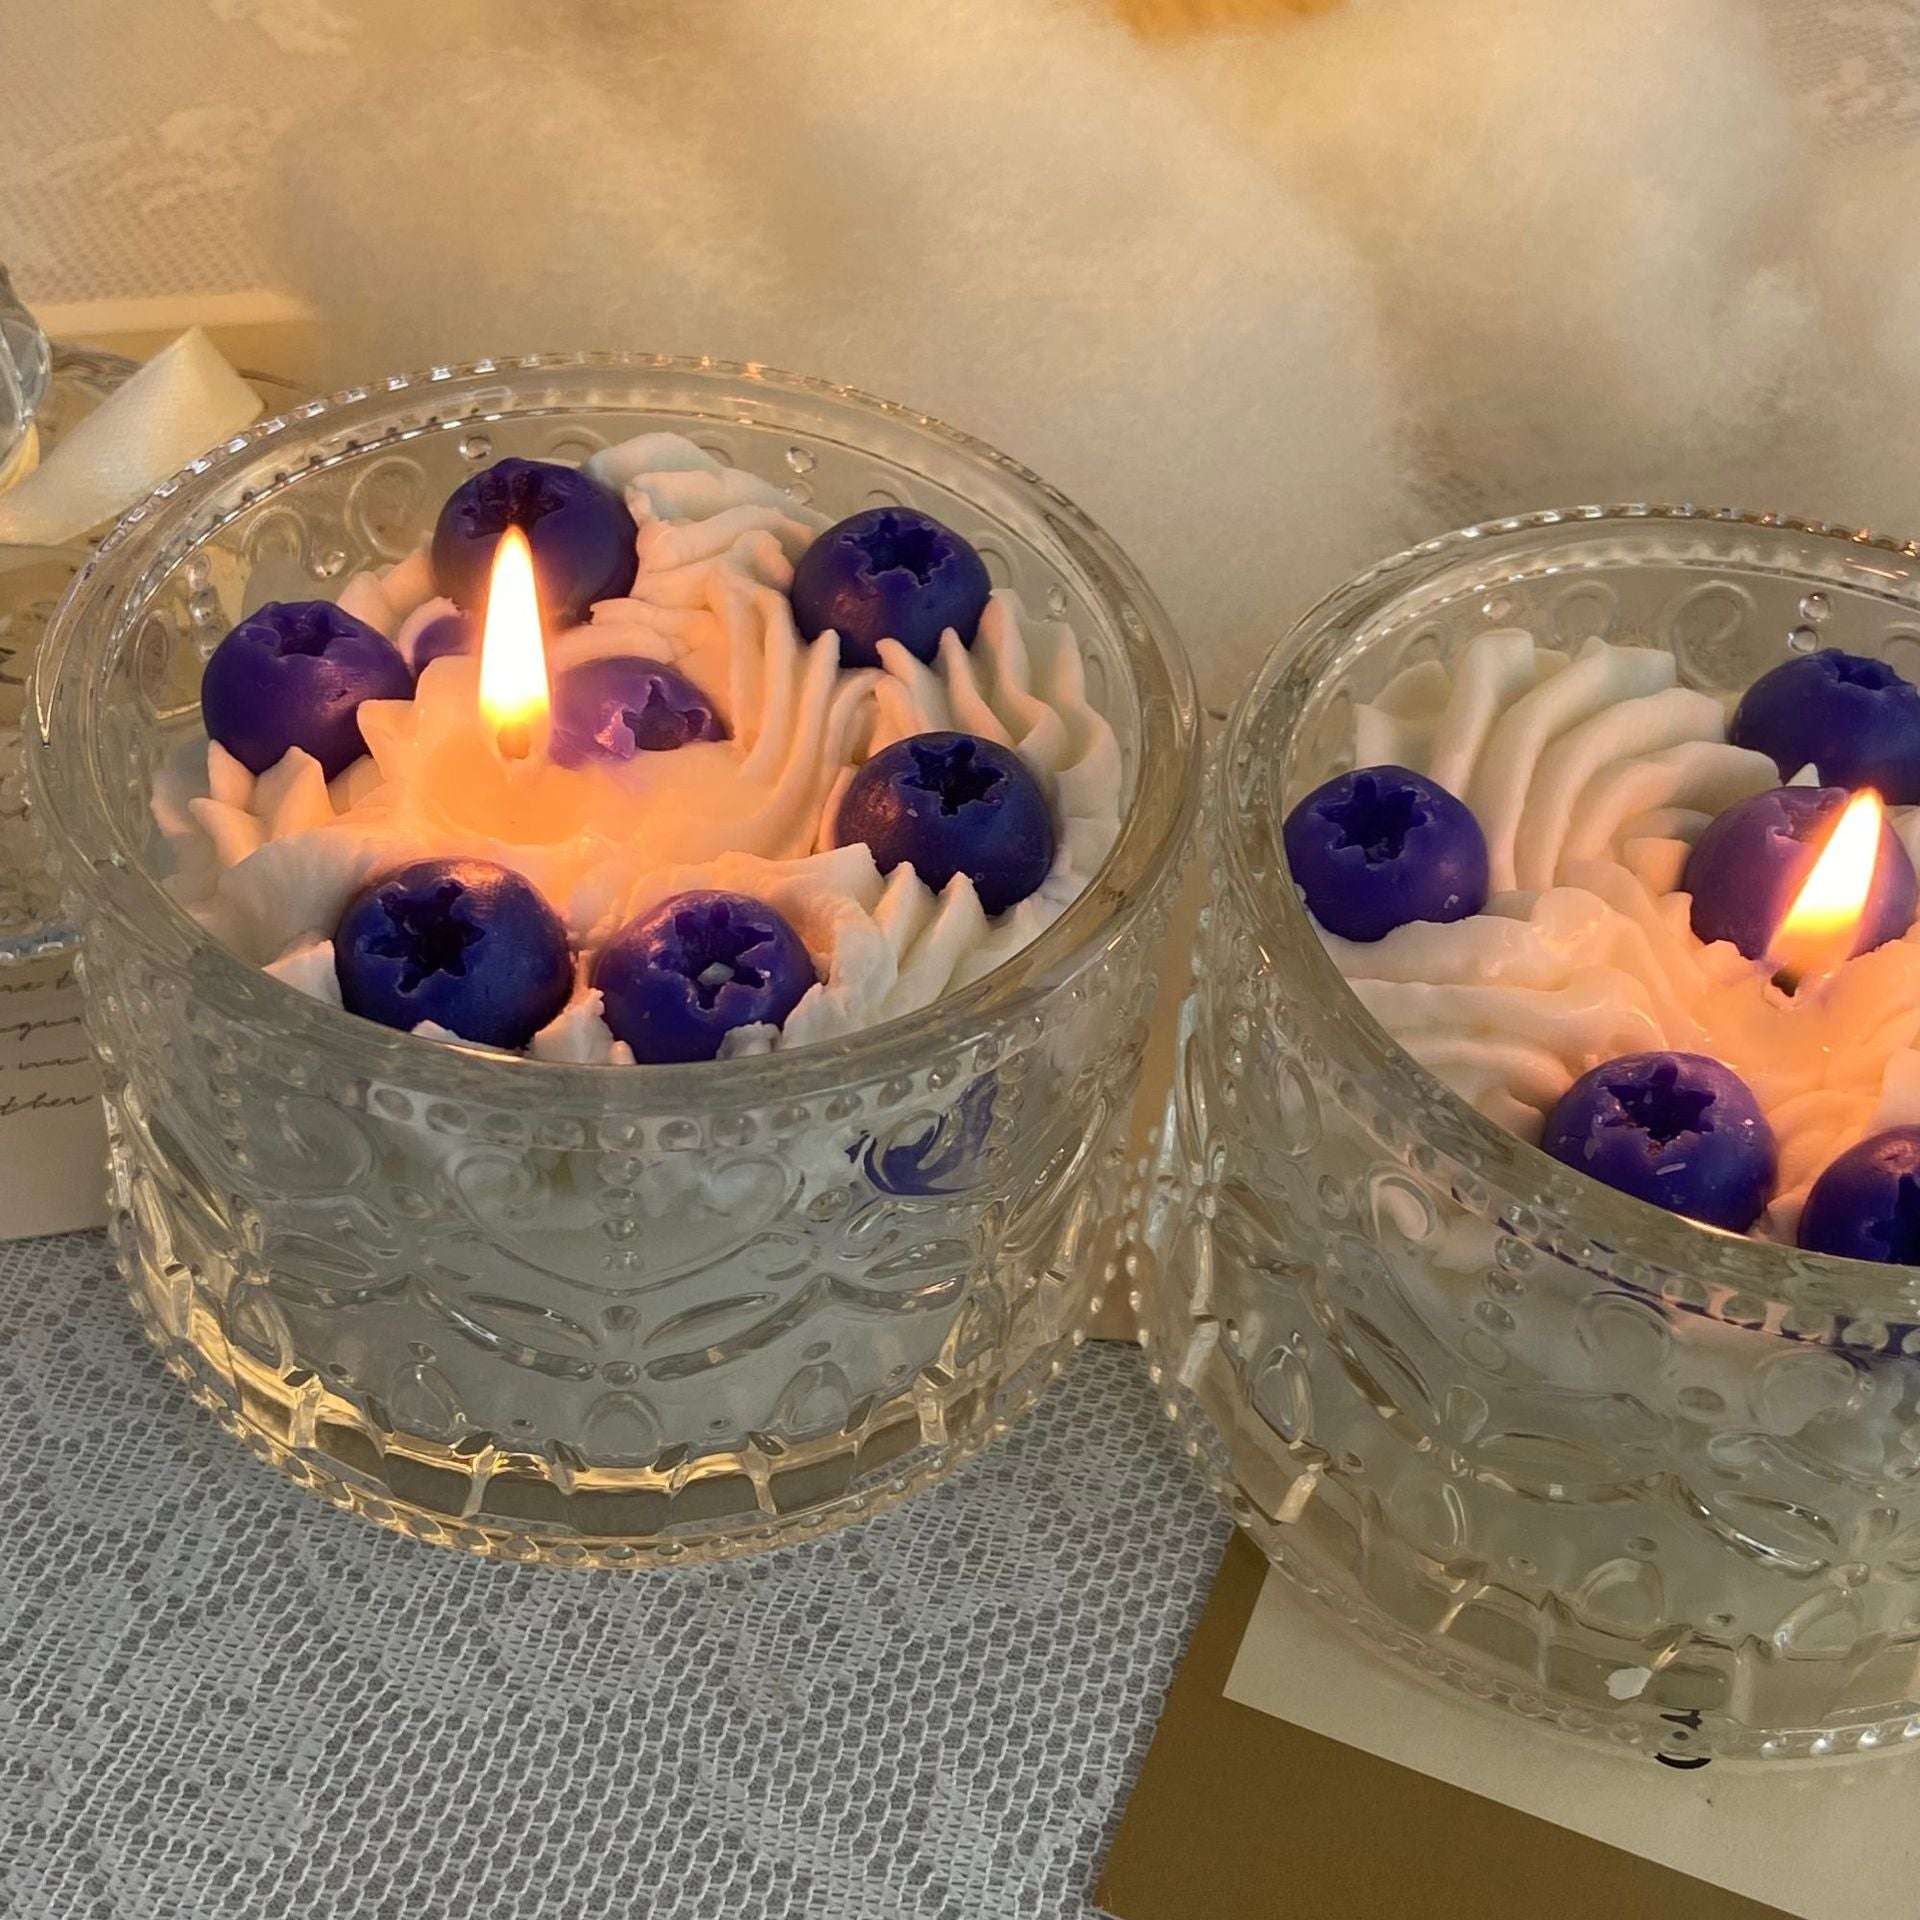 Soy Wax Aromatherapy Candle in a Cup - Create a Serene Ambience with Handmade Scented Candles - Perfect Gift for Any Occasion - Gifting By Julia M